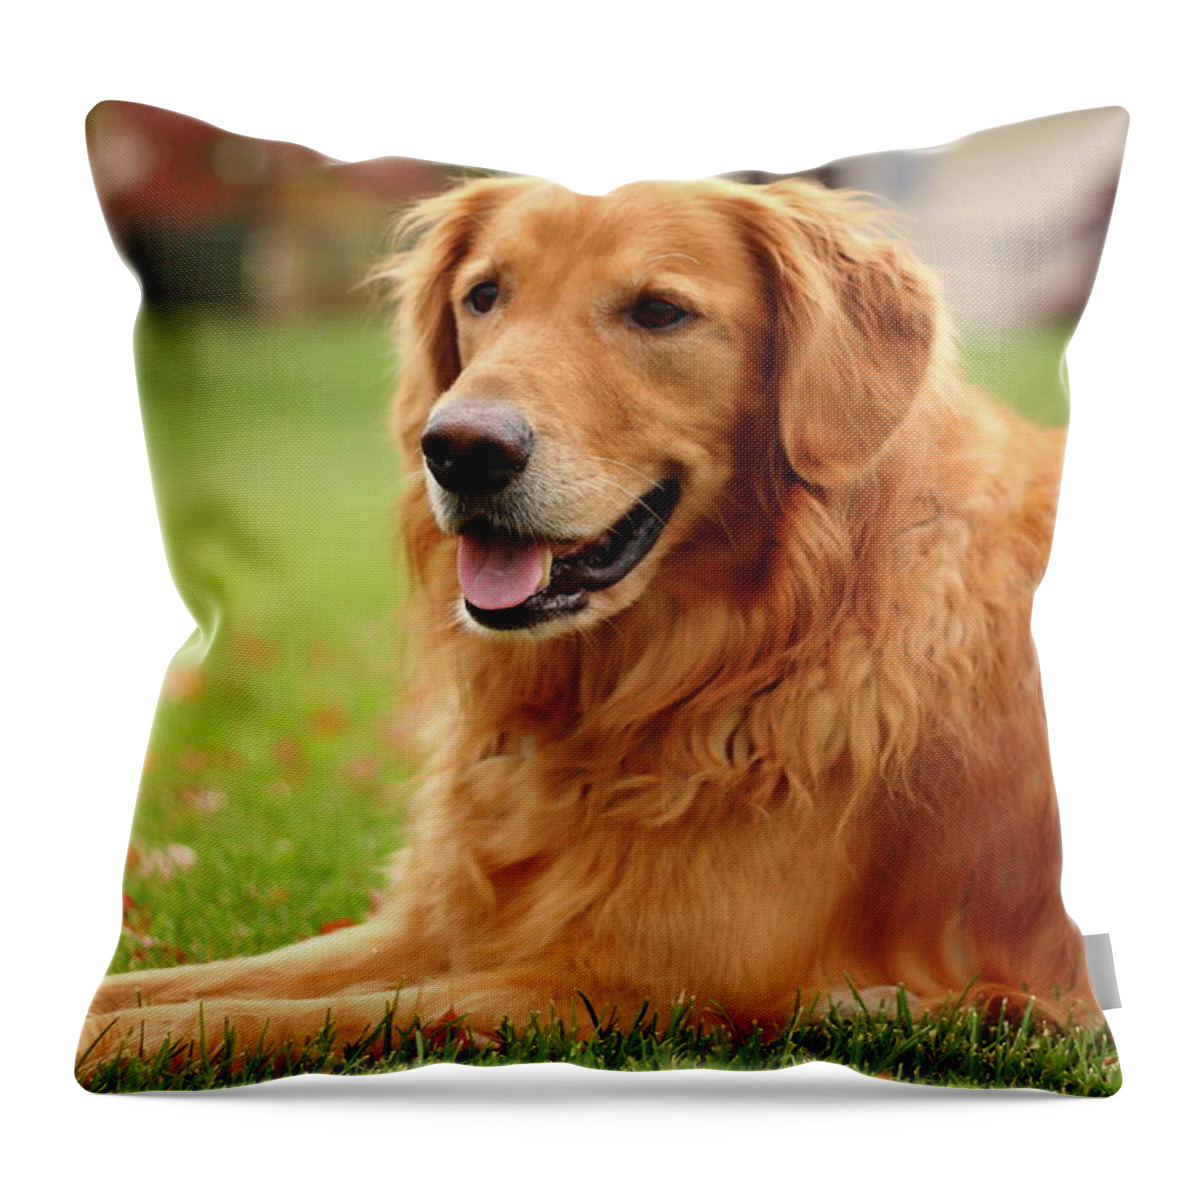 Dog Throw Pillow featuring the photograph Handsome Golden by Lens Art Photography By Larry Trager